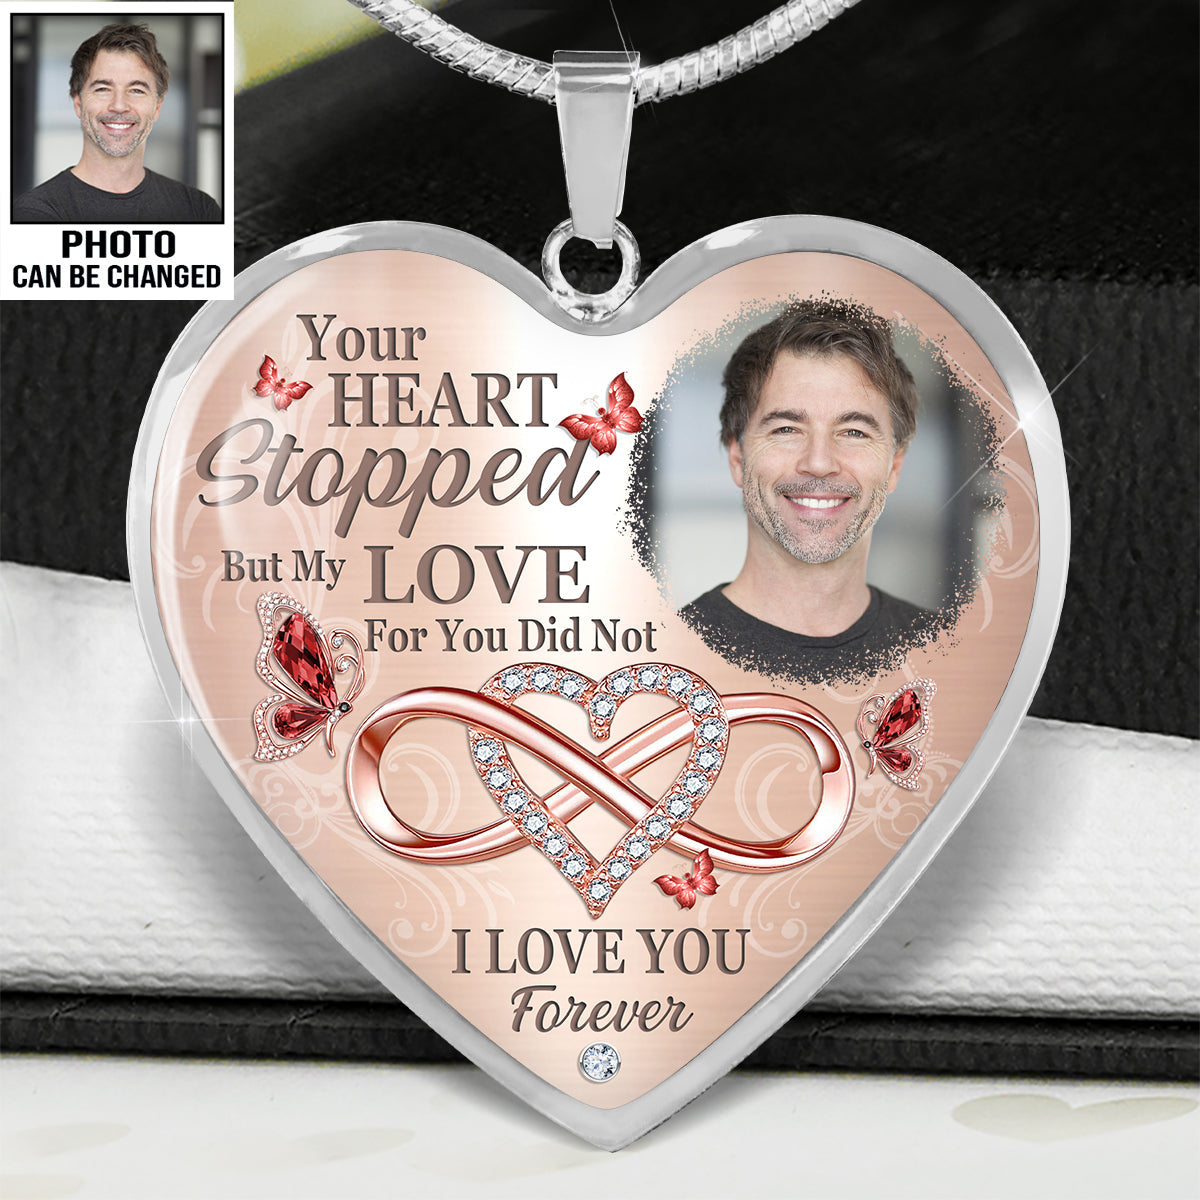 My Love For You Did Not Customize Photo Necklace